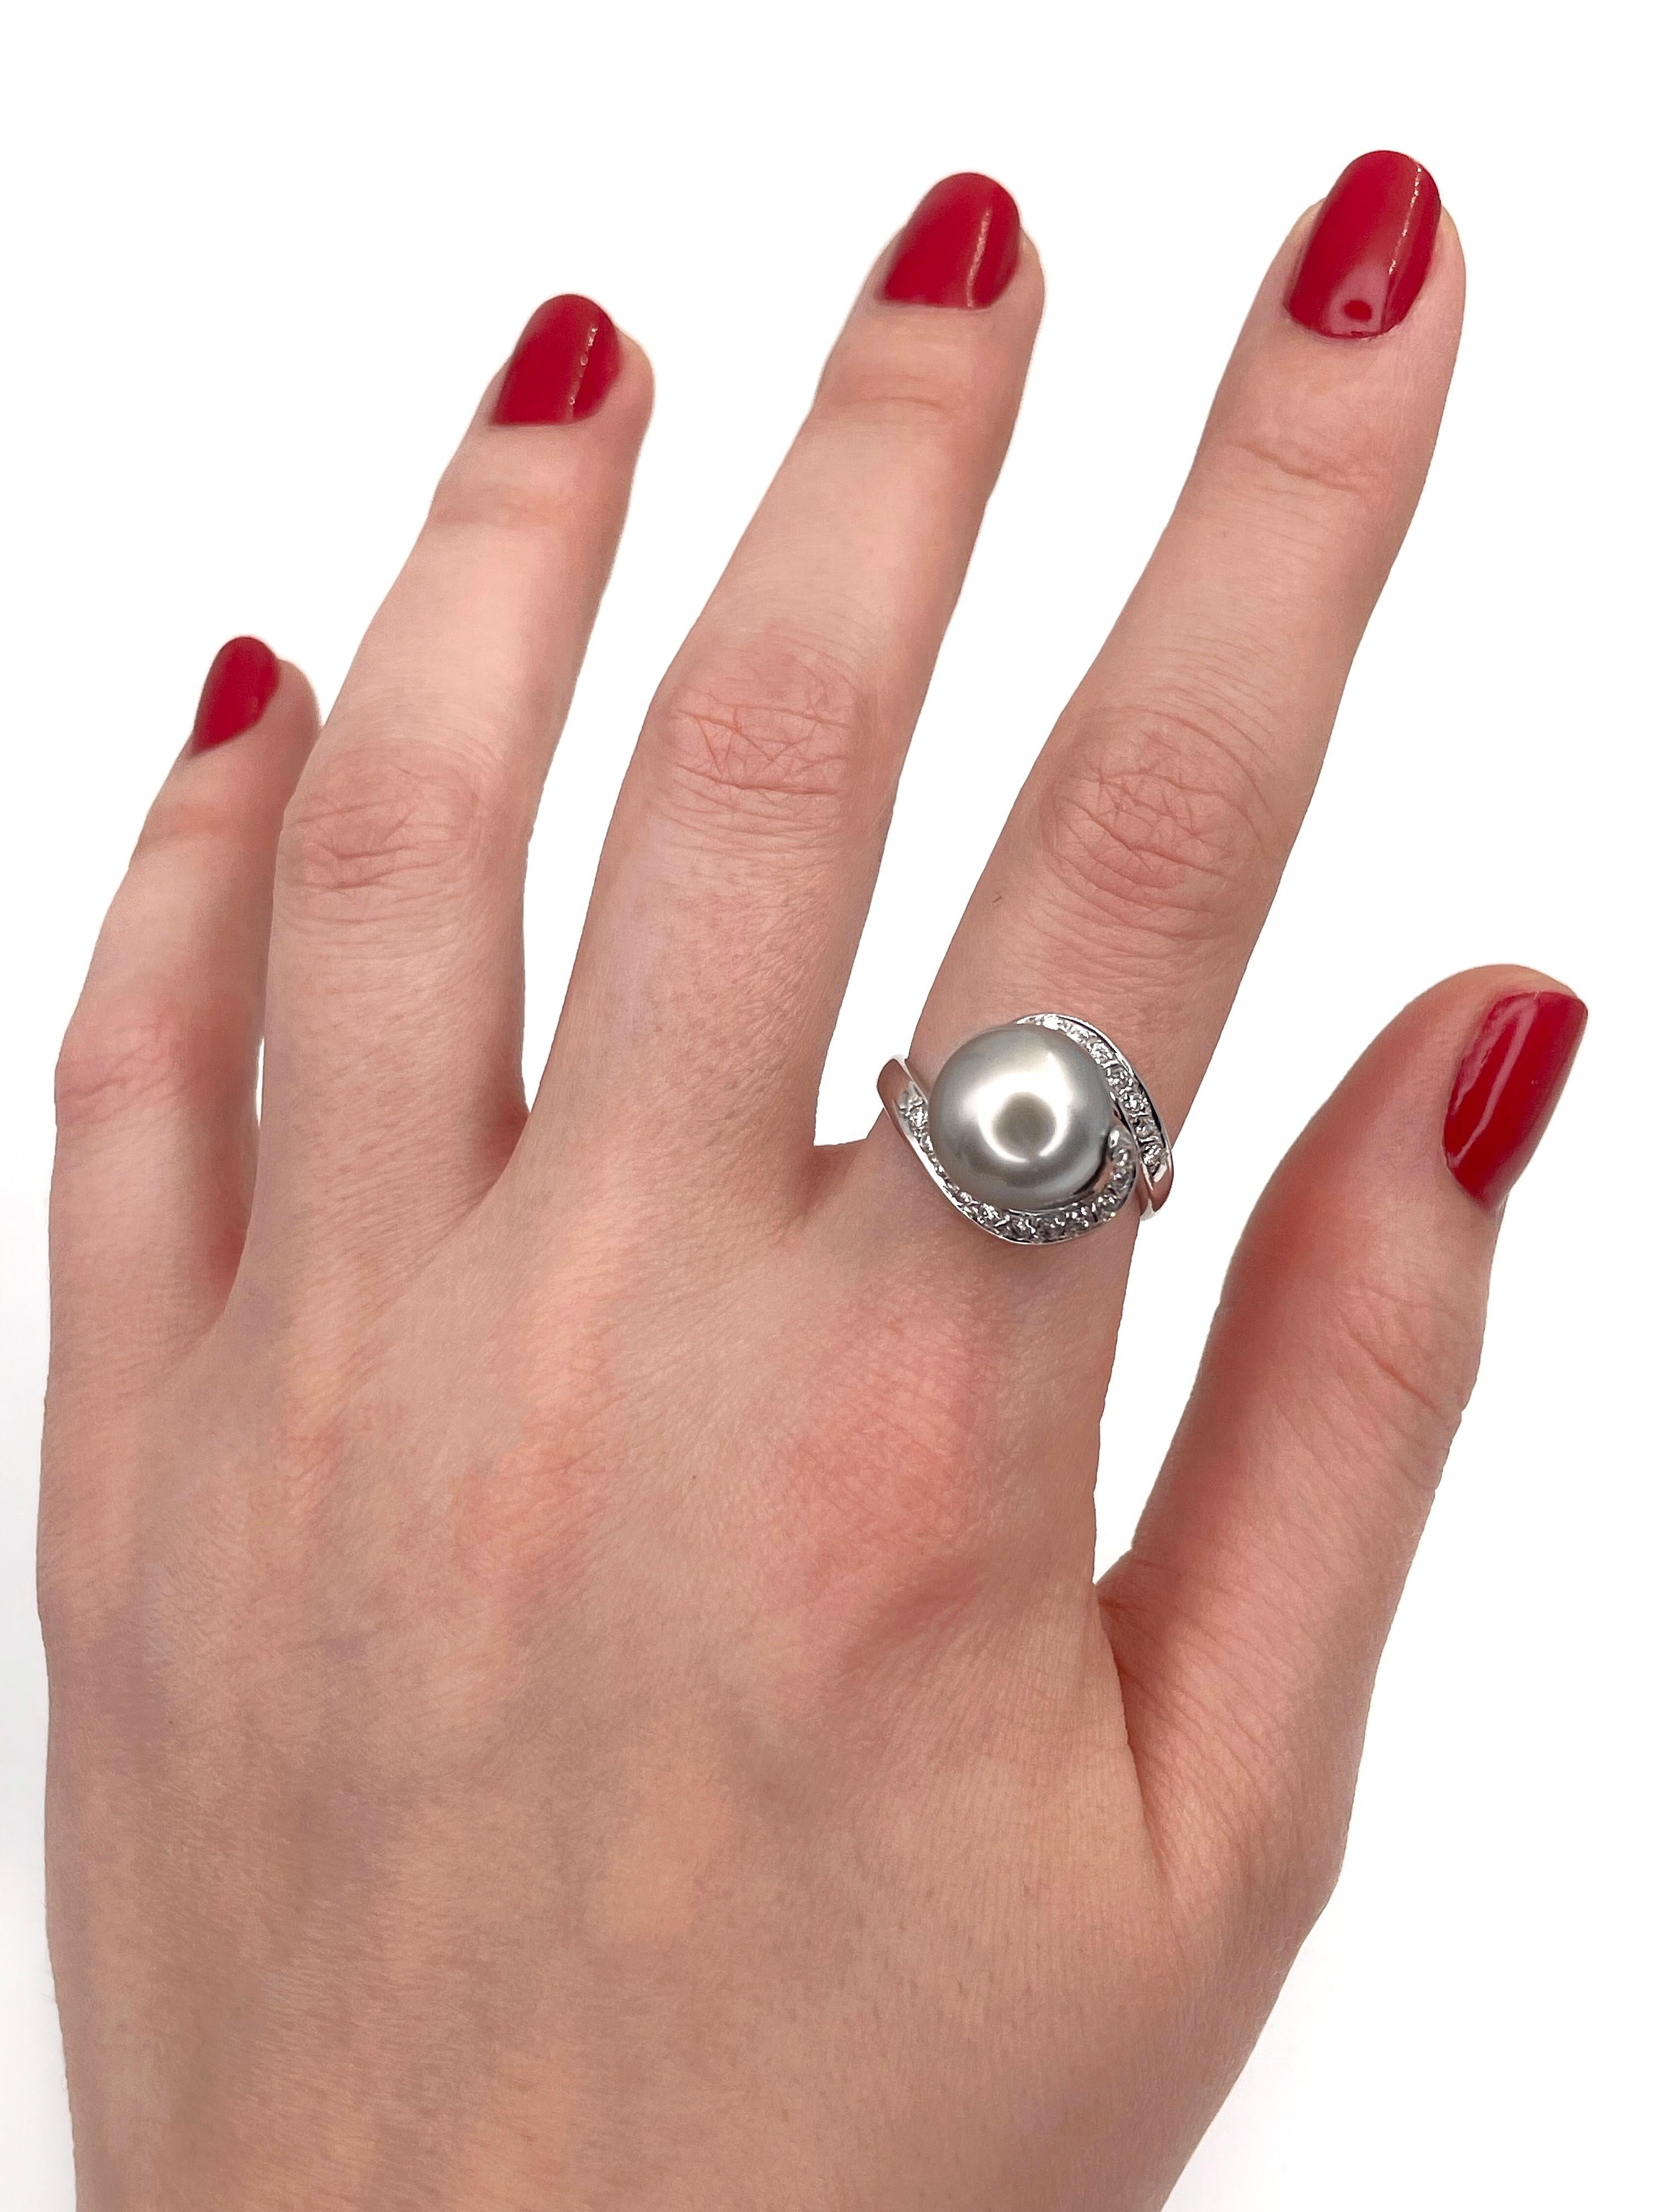 This is a vintage cocktail ring crafted in 18K white gold. Circa 1980. It features a cultured Tahitian pearl and 17 brilliant cut diamonds: TW 0.21ct, RW-W, SI. 

Weight: 7.58g
Size: 17.25 (US 6.75)

IMPORTANT: please ask about the possibility to